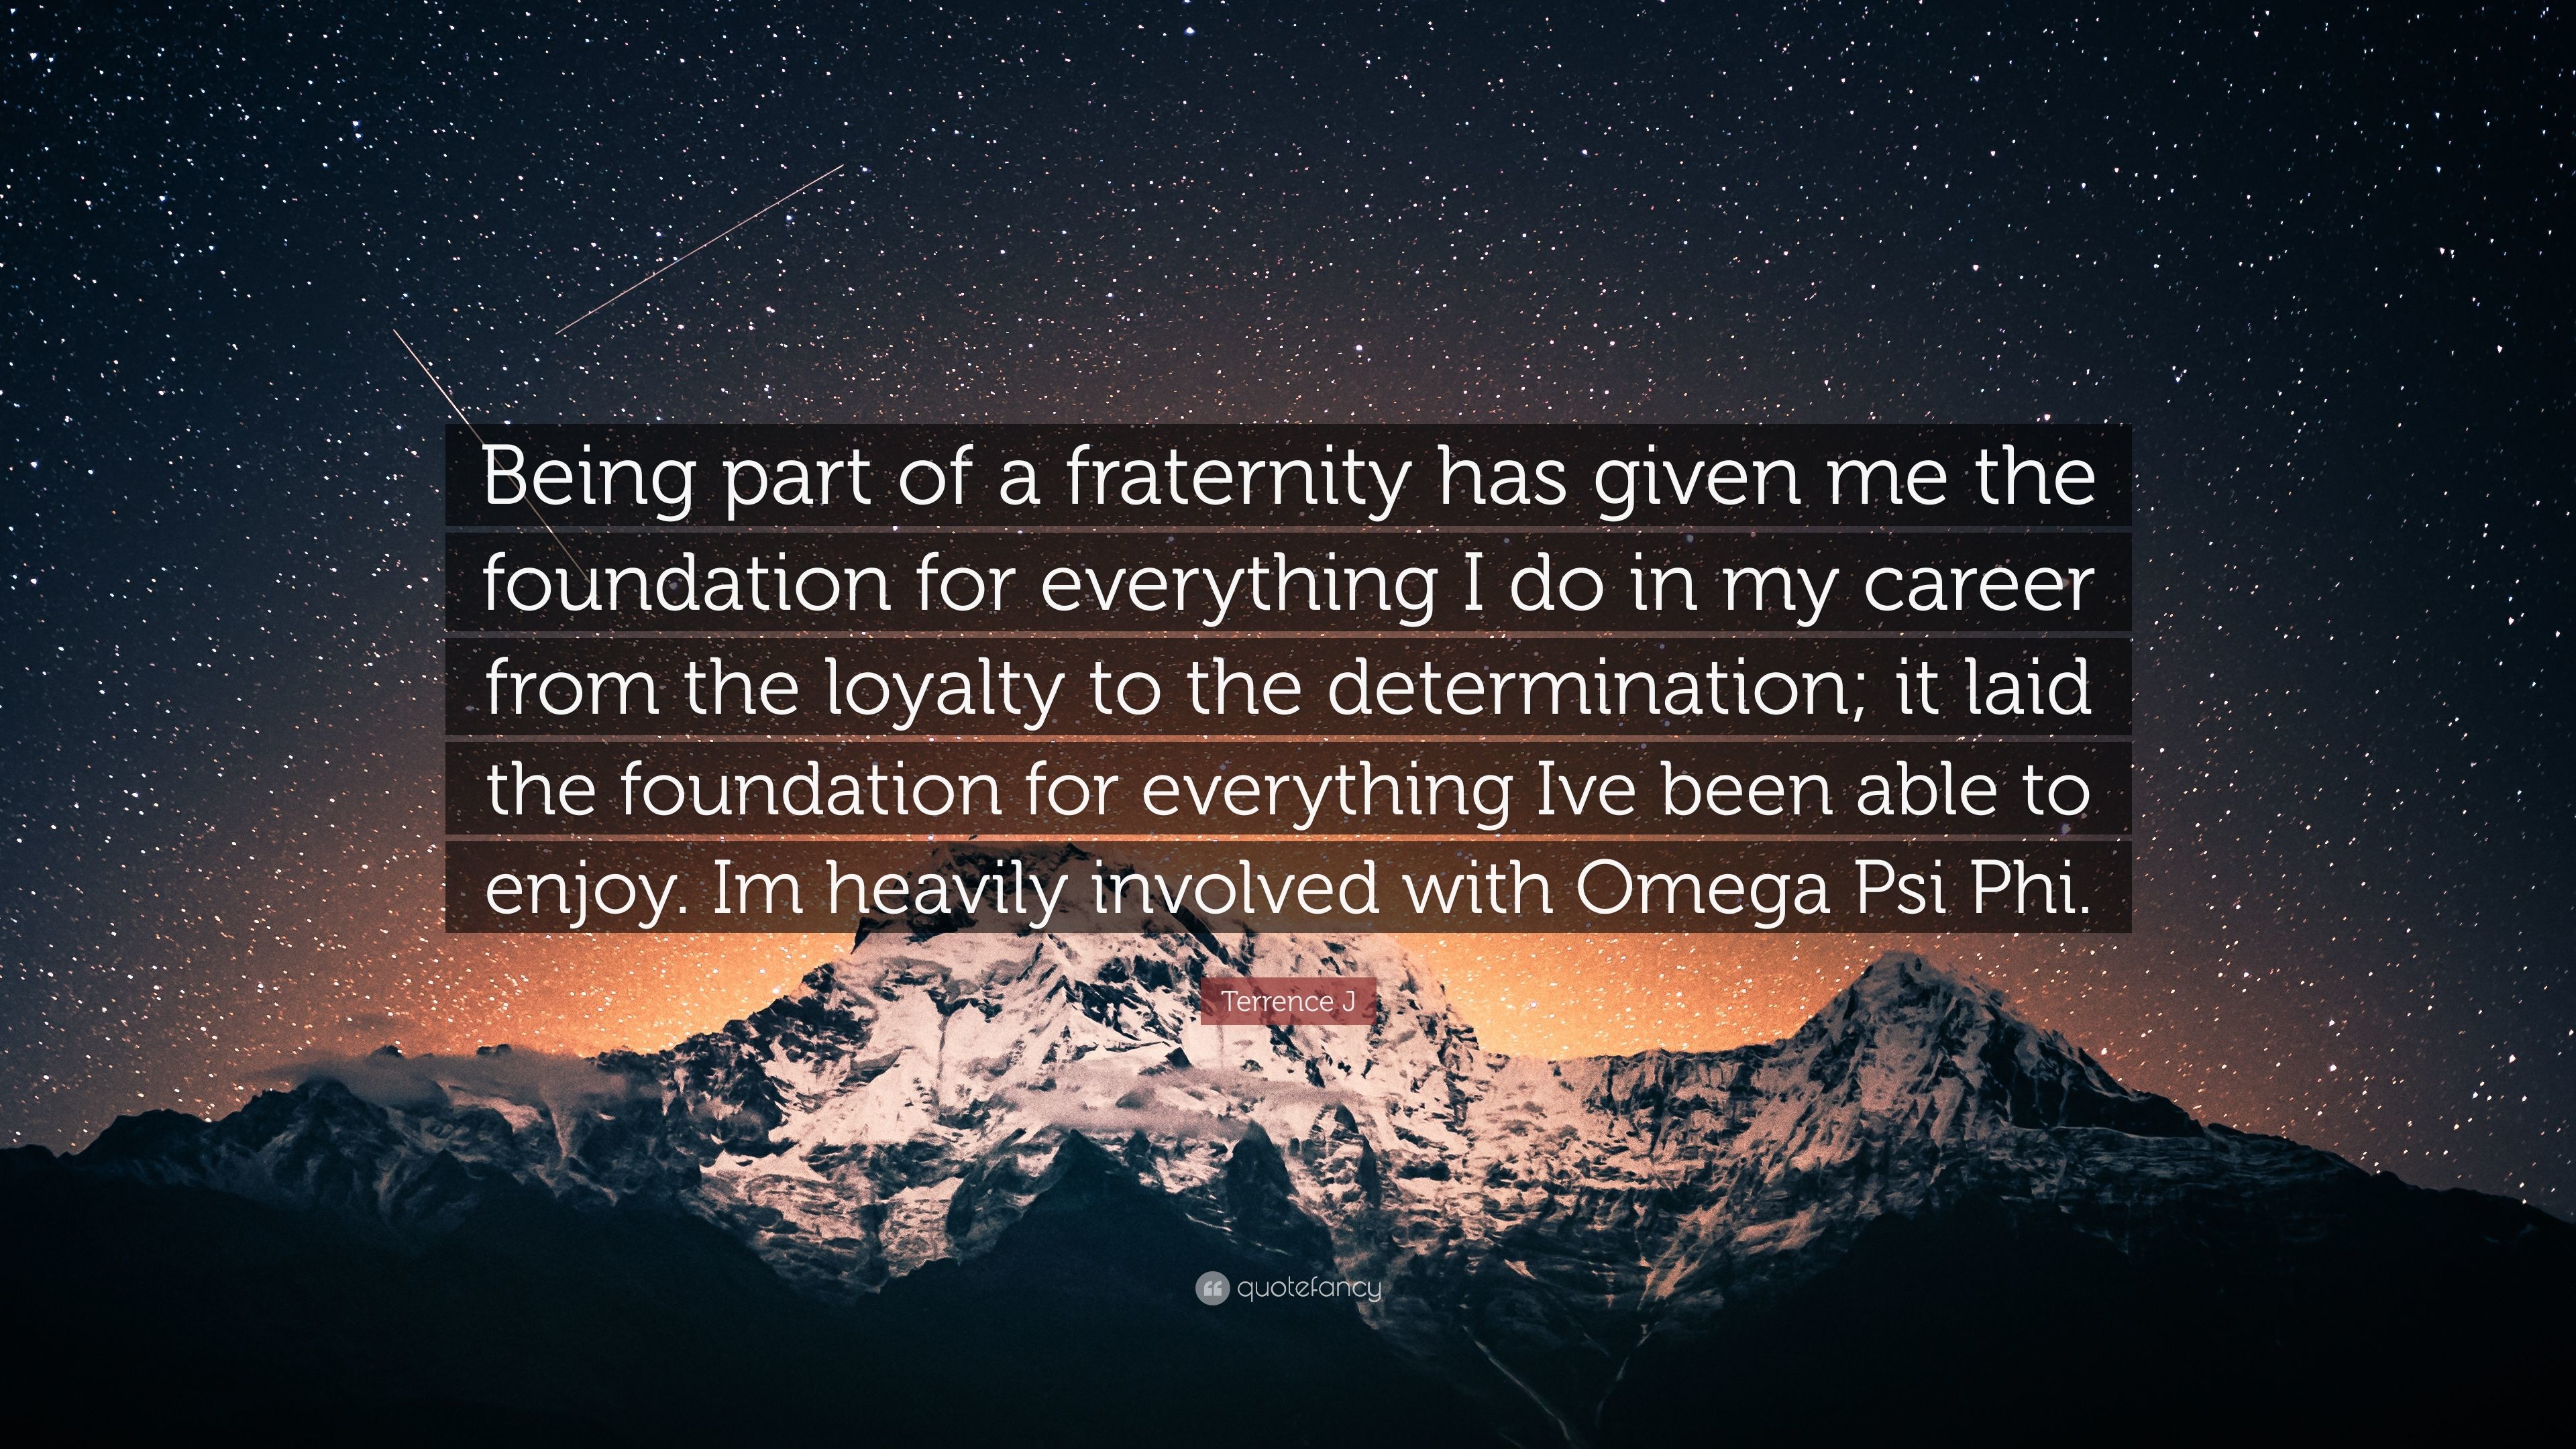 3840x2160 Terrence J Quote: “Being part of a fraternity has given me the foundation  for